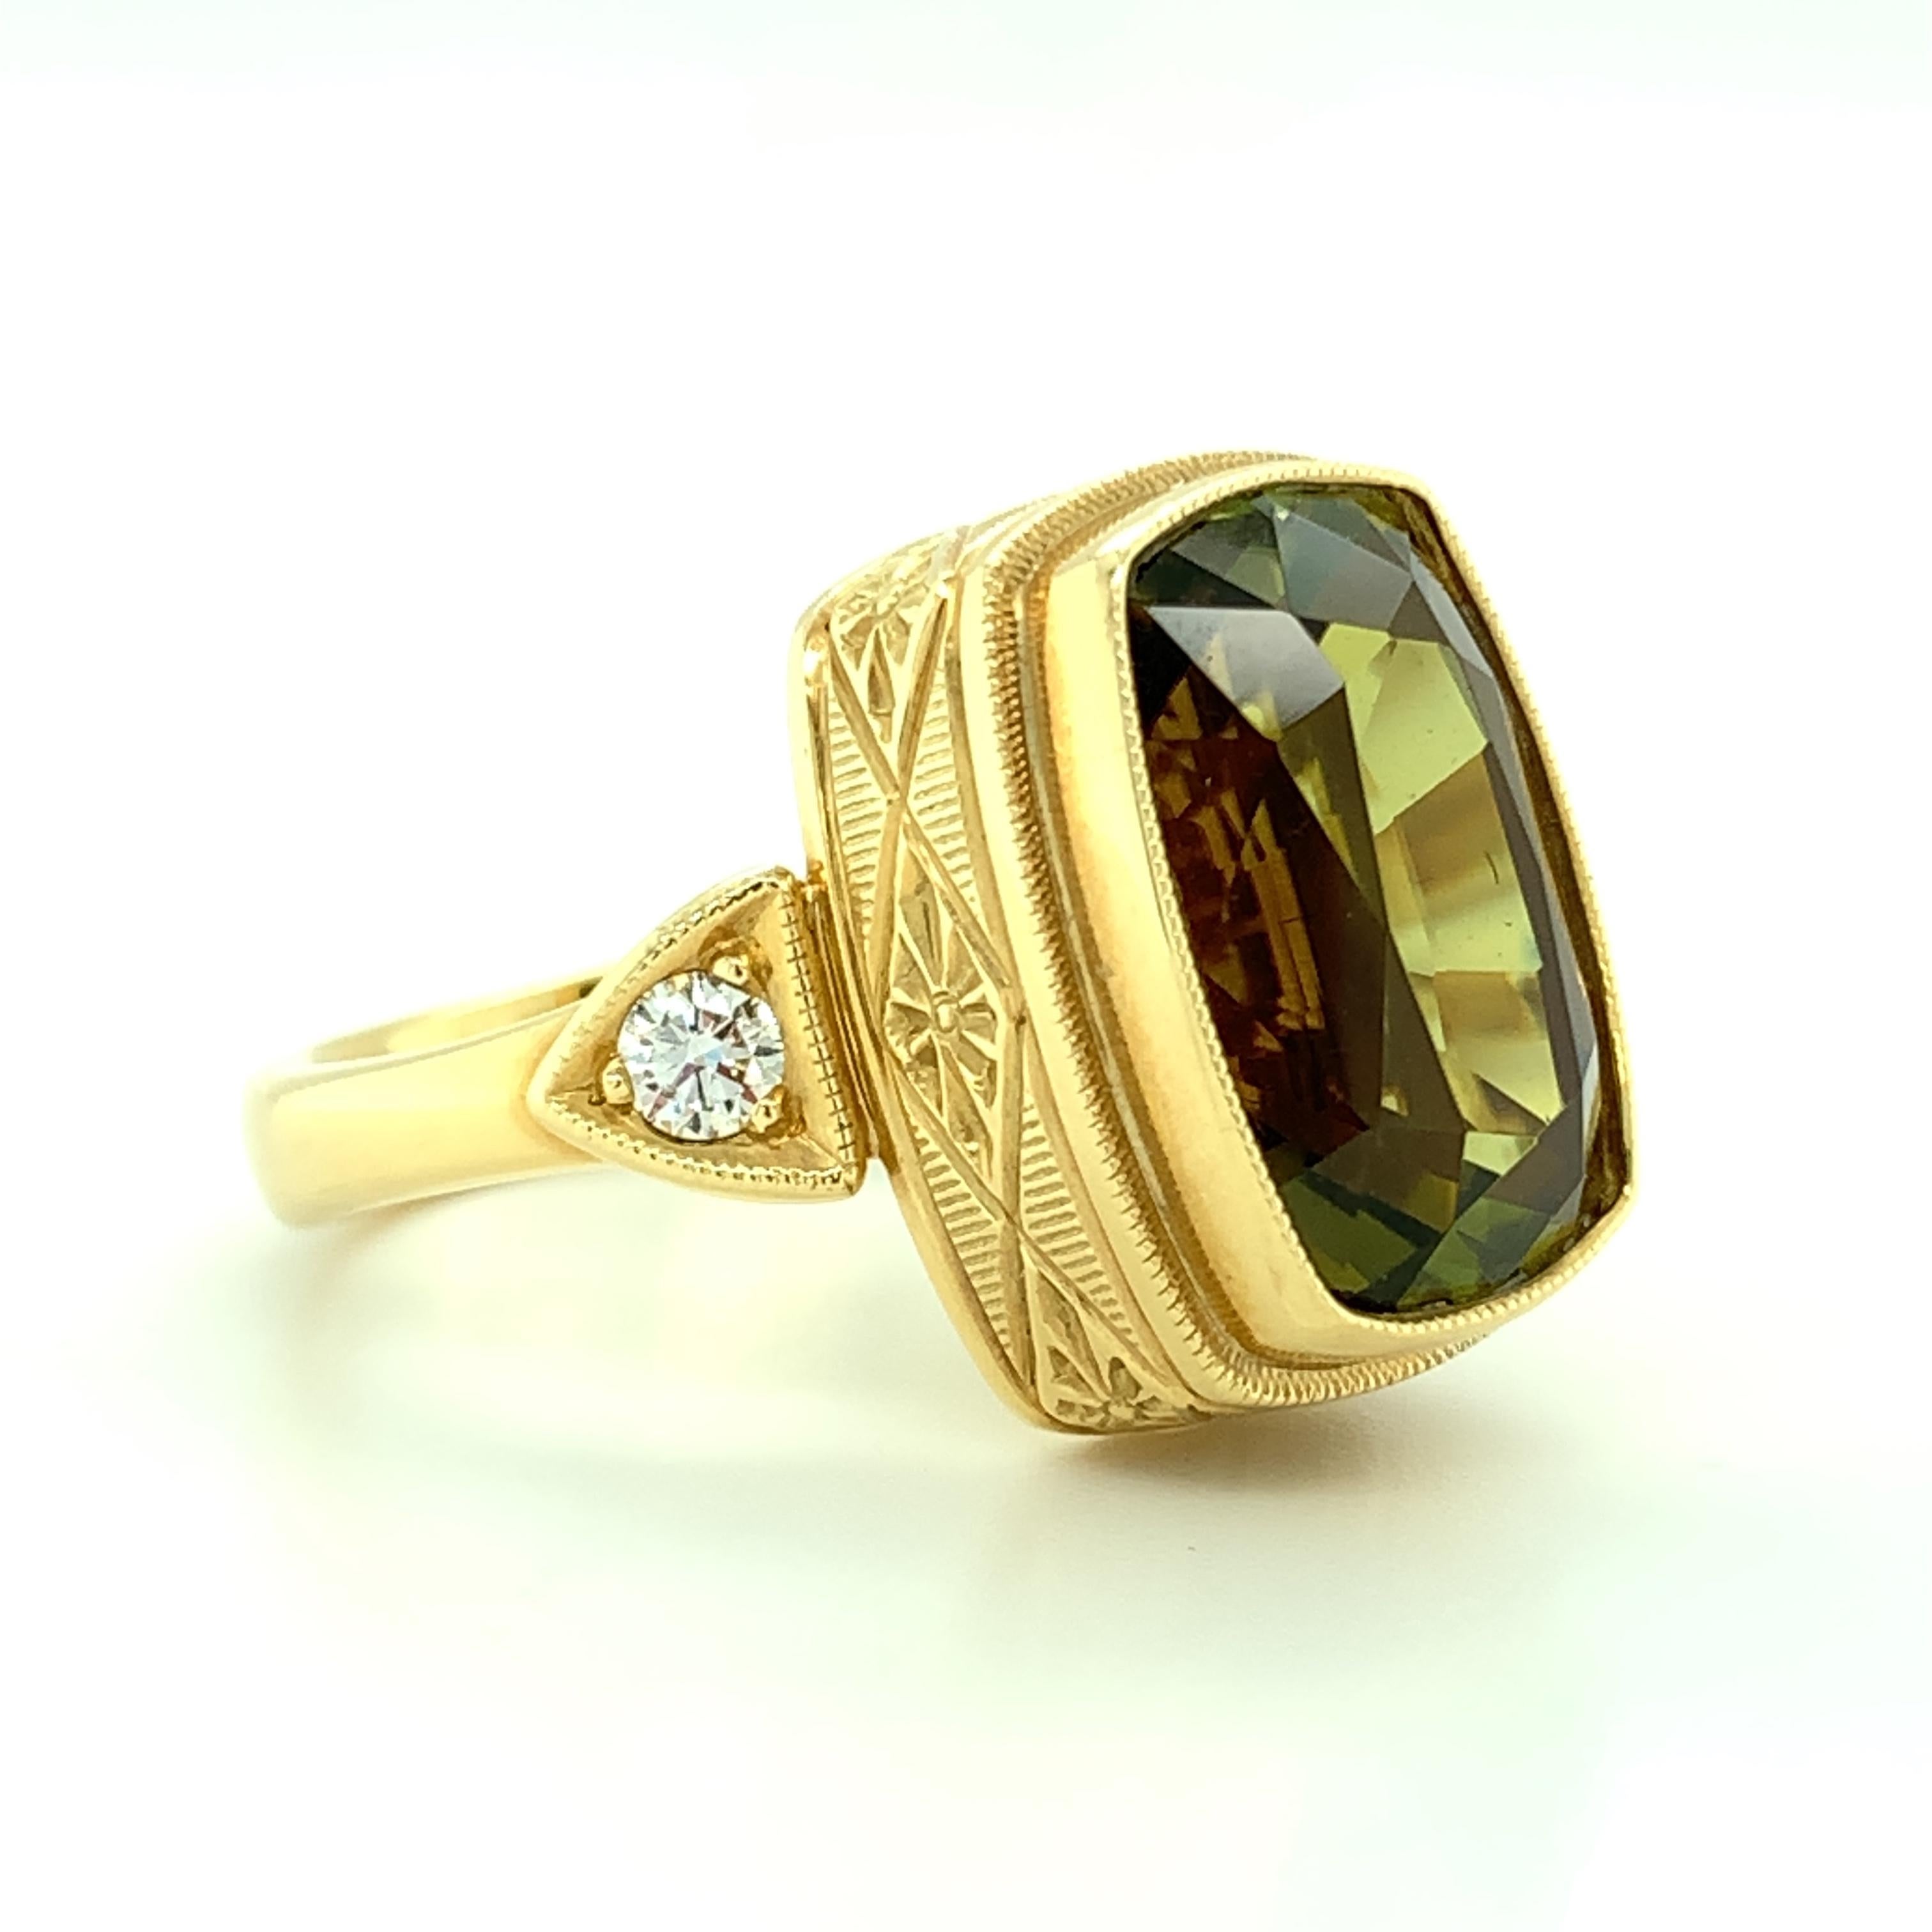 Cushion Cut 6.75 Carat Green Tourmaline and Diamond, Yellow Gold Engraved Bezel Ring For Sale